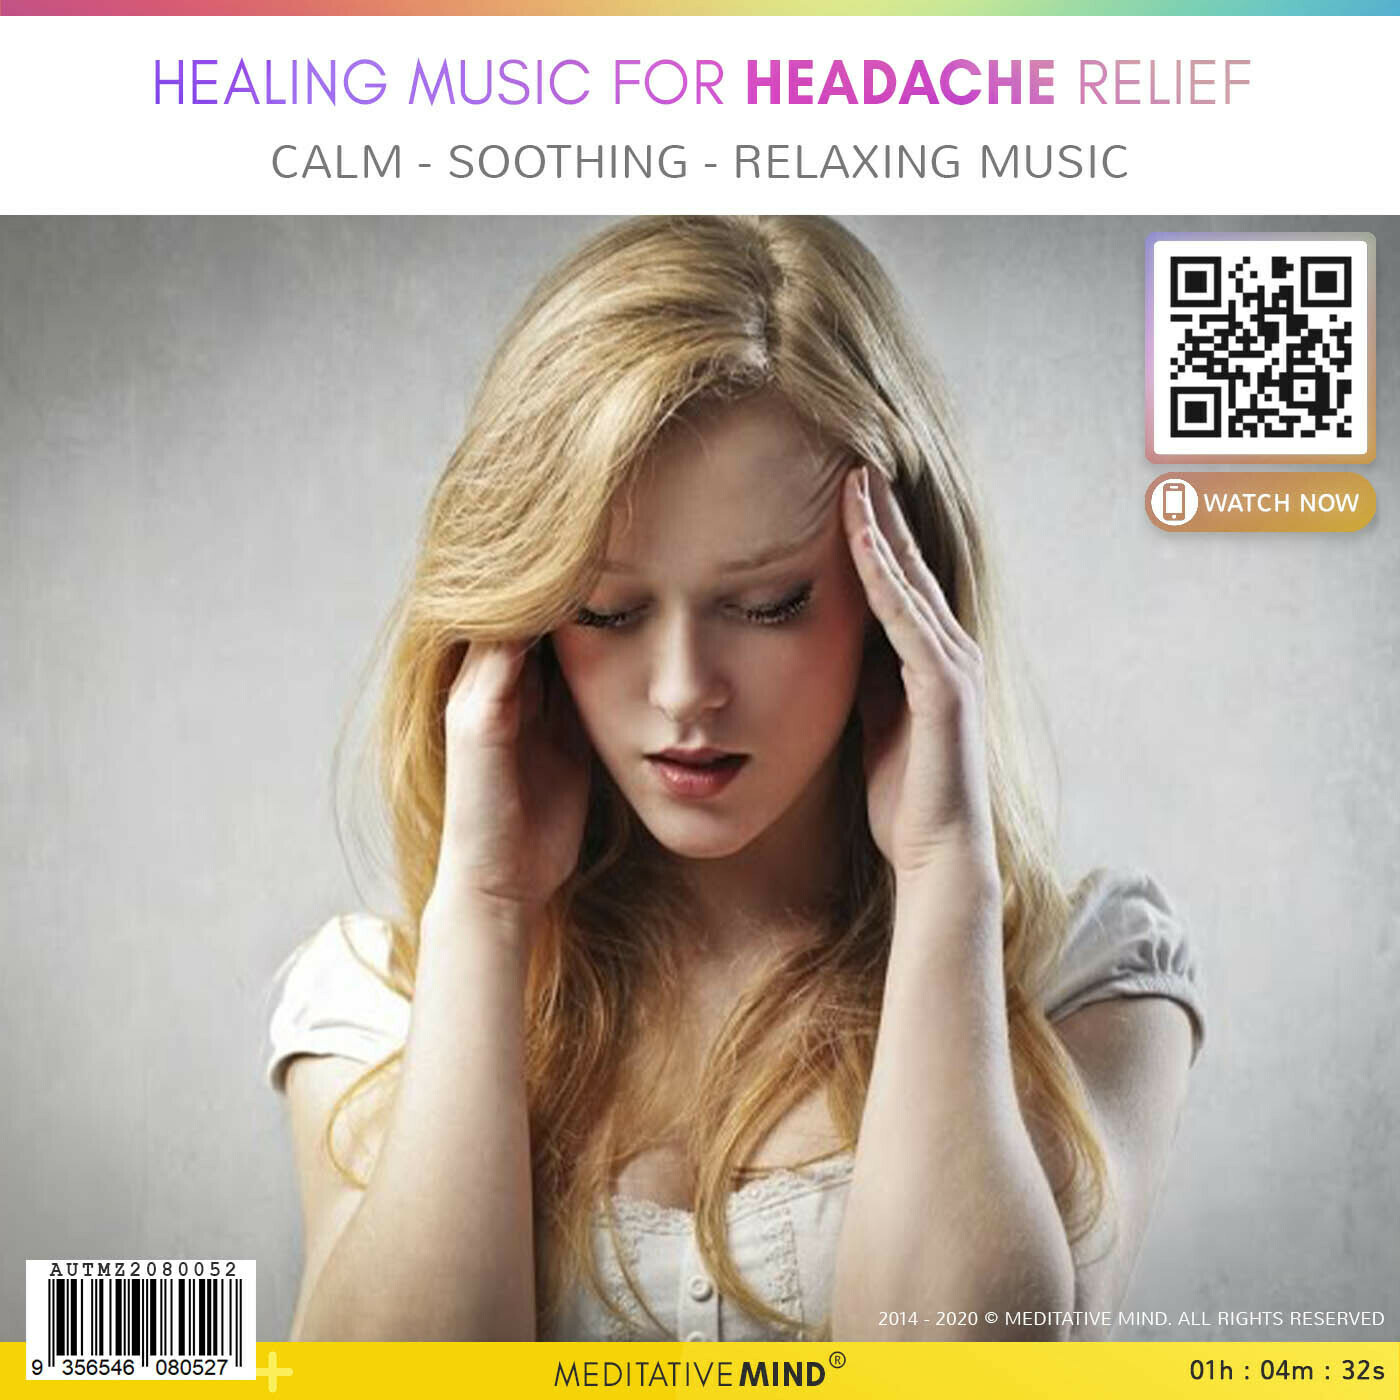 Healing Music for Headache Relief - Calm - Soothing - Relaxing Music |  Meditative Mind's Official Music Store | Meditative Mind